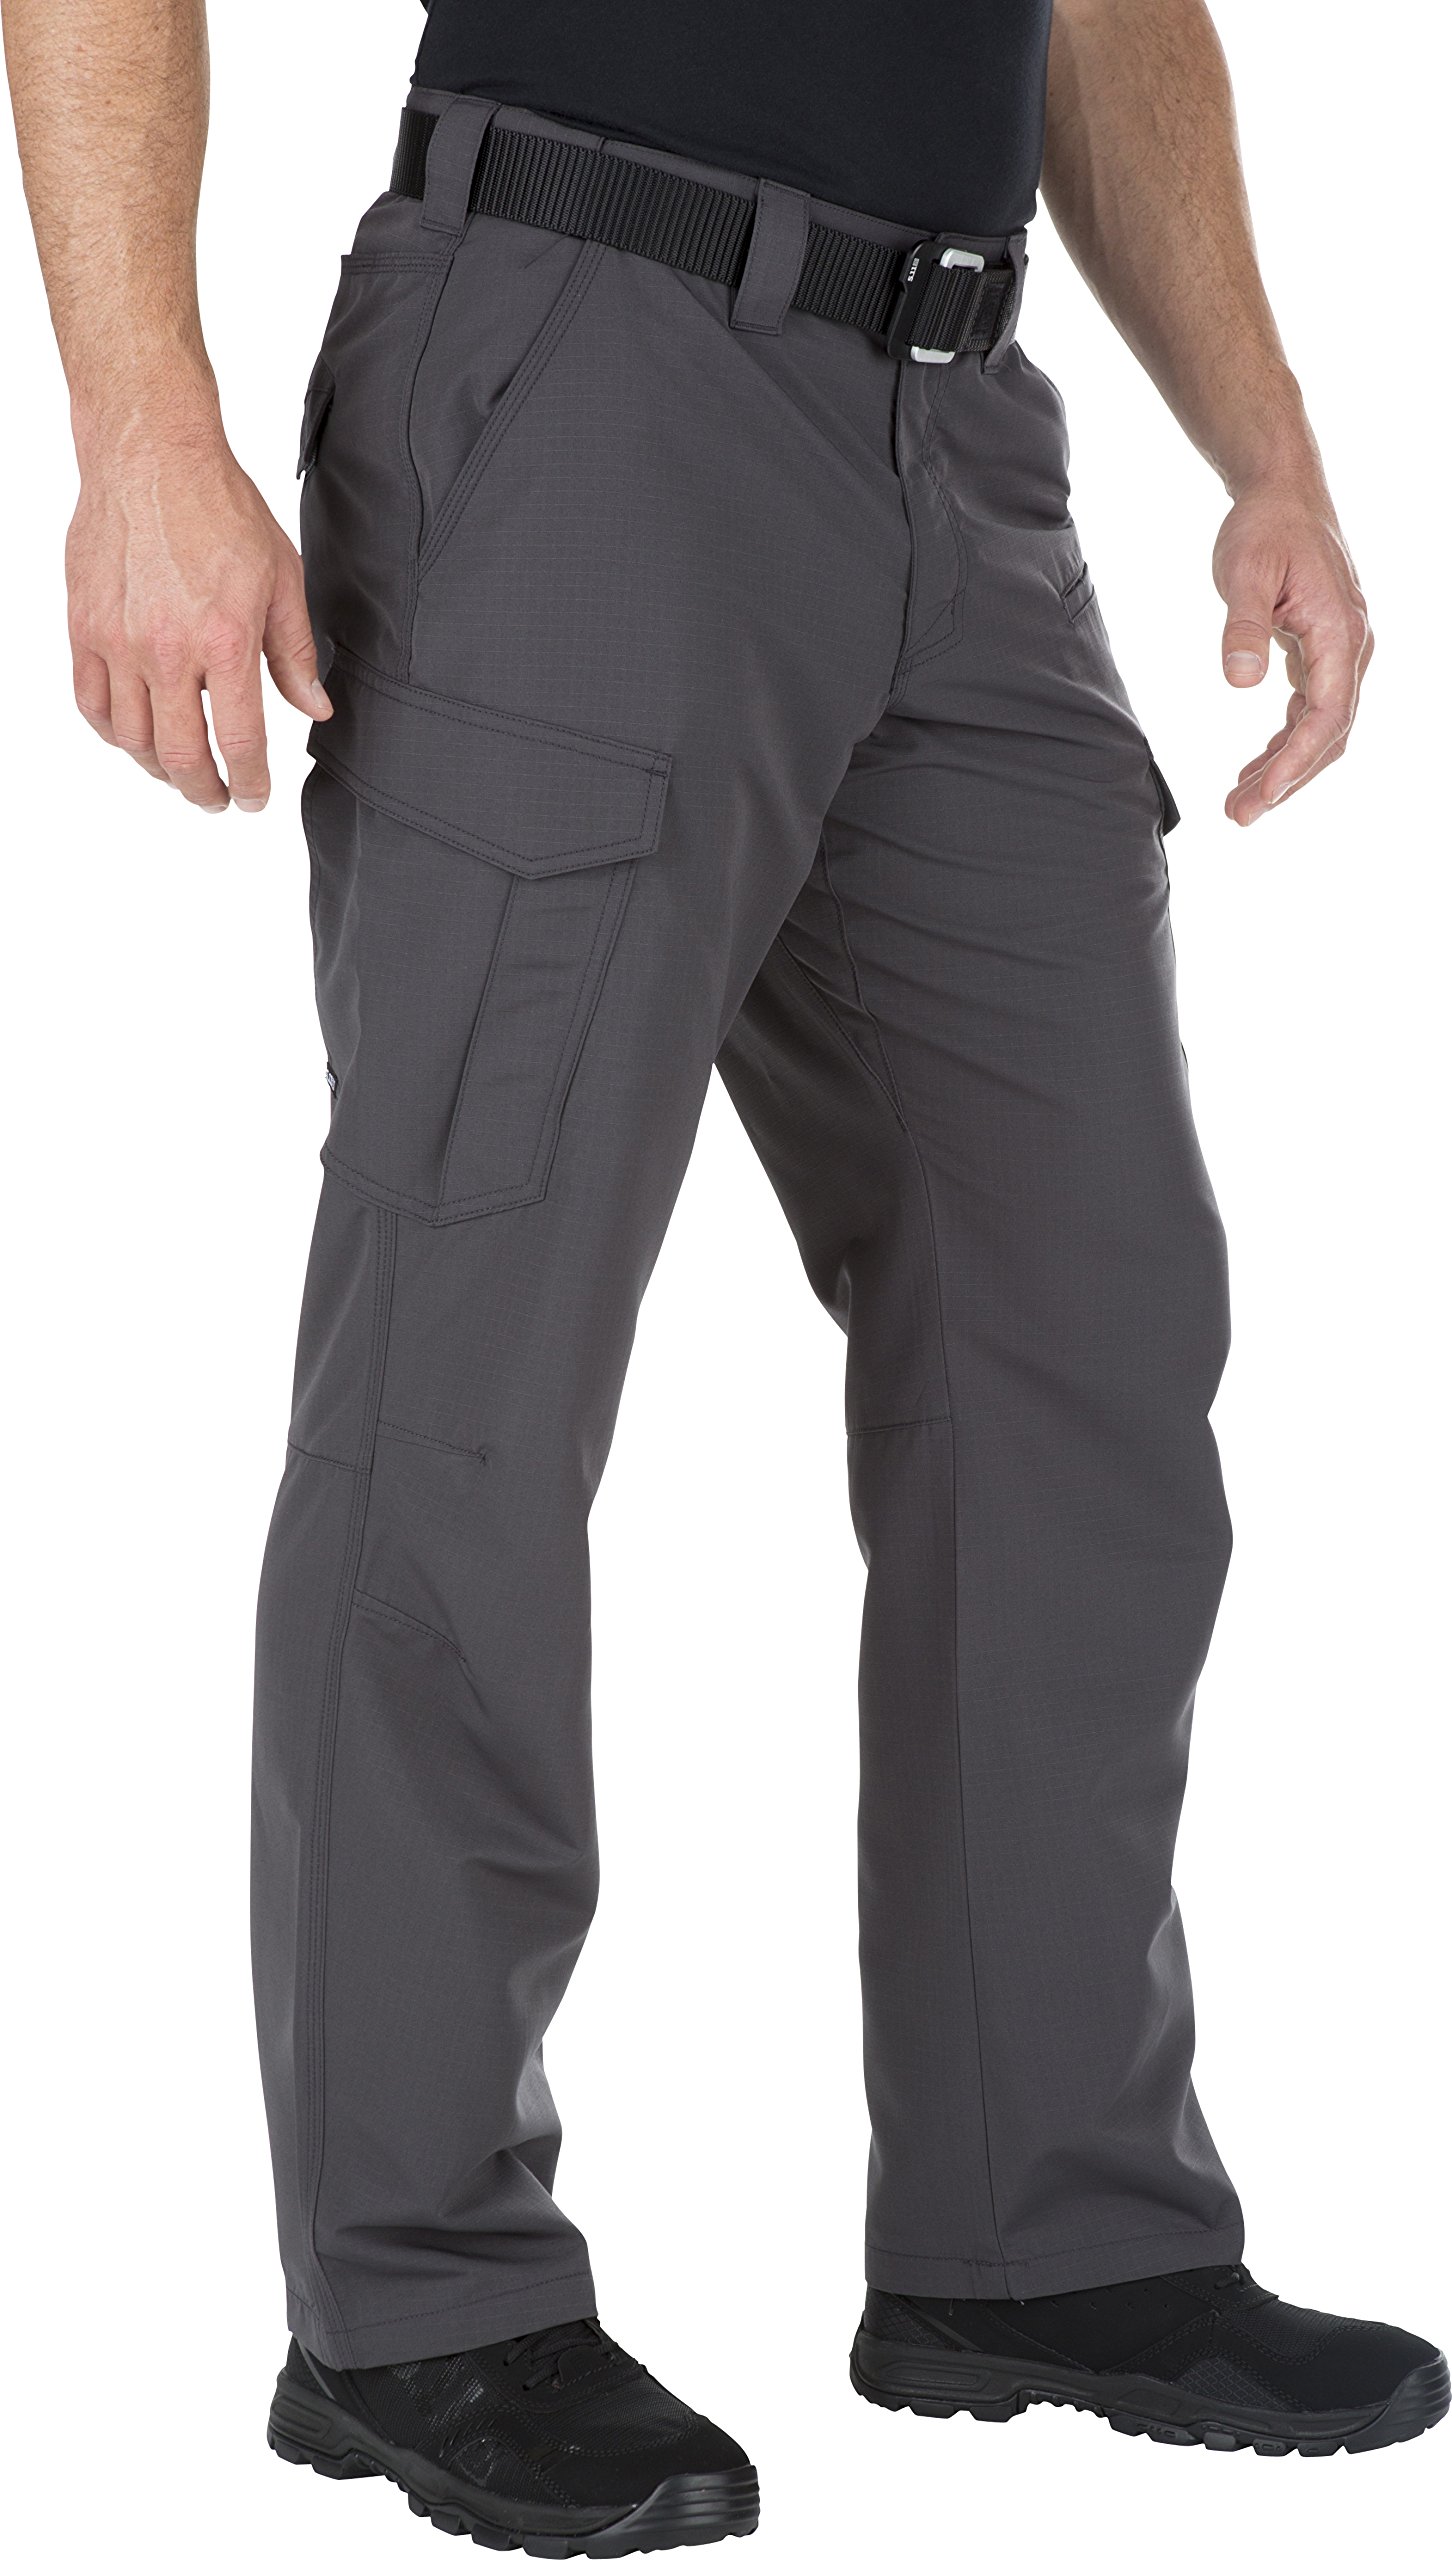 5.11 Tactical Men's Fast-Tac Cargo Pants, Water-Resistant Finish, Dual Magazine Pockets, Style 74439